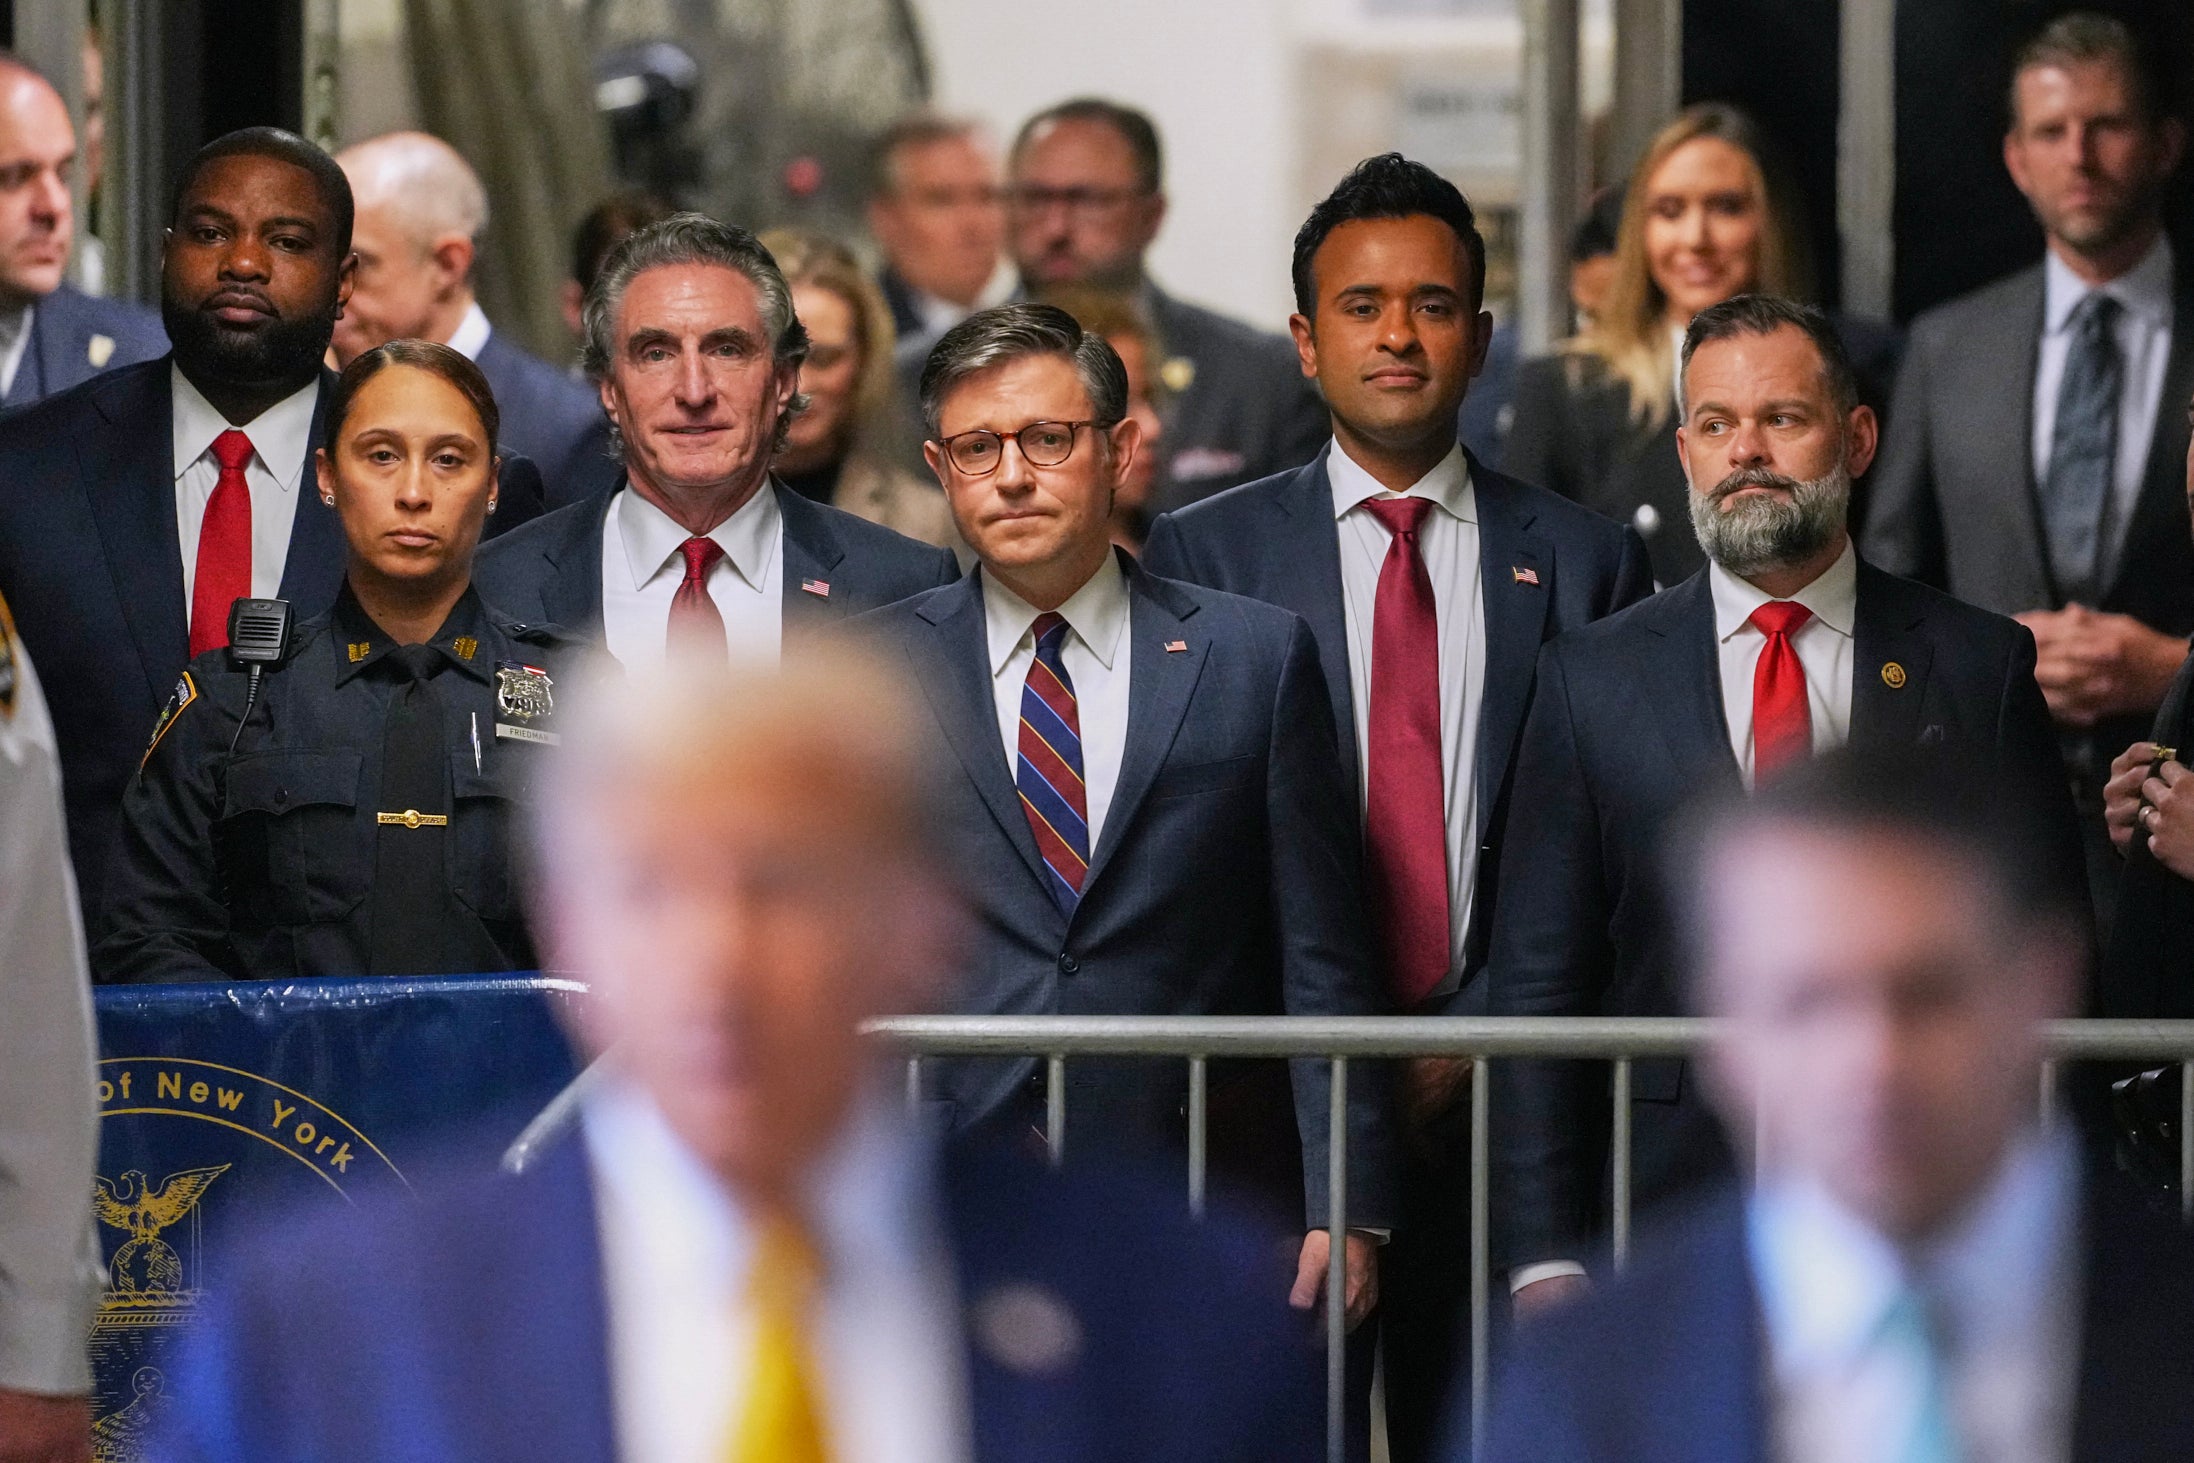 US Rep Byron Donalds, North Dakota Governor Doug Burgum, House Speaker Mike Johnson, former GOP candidate Vivek Ramaswamy, and US Rep Cory Mills attend Donald Trump’s hush money trial on May 14